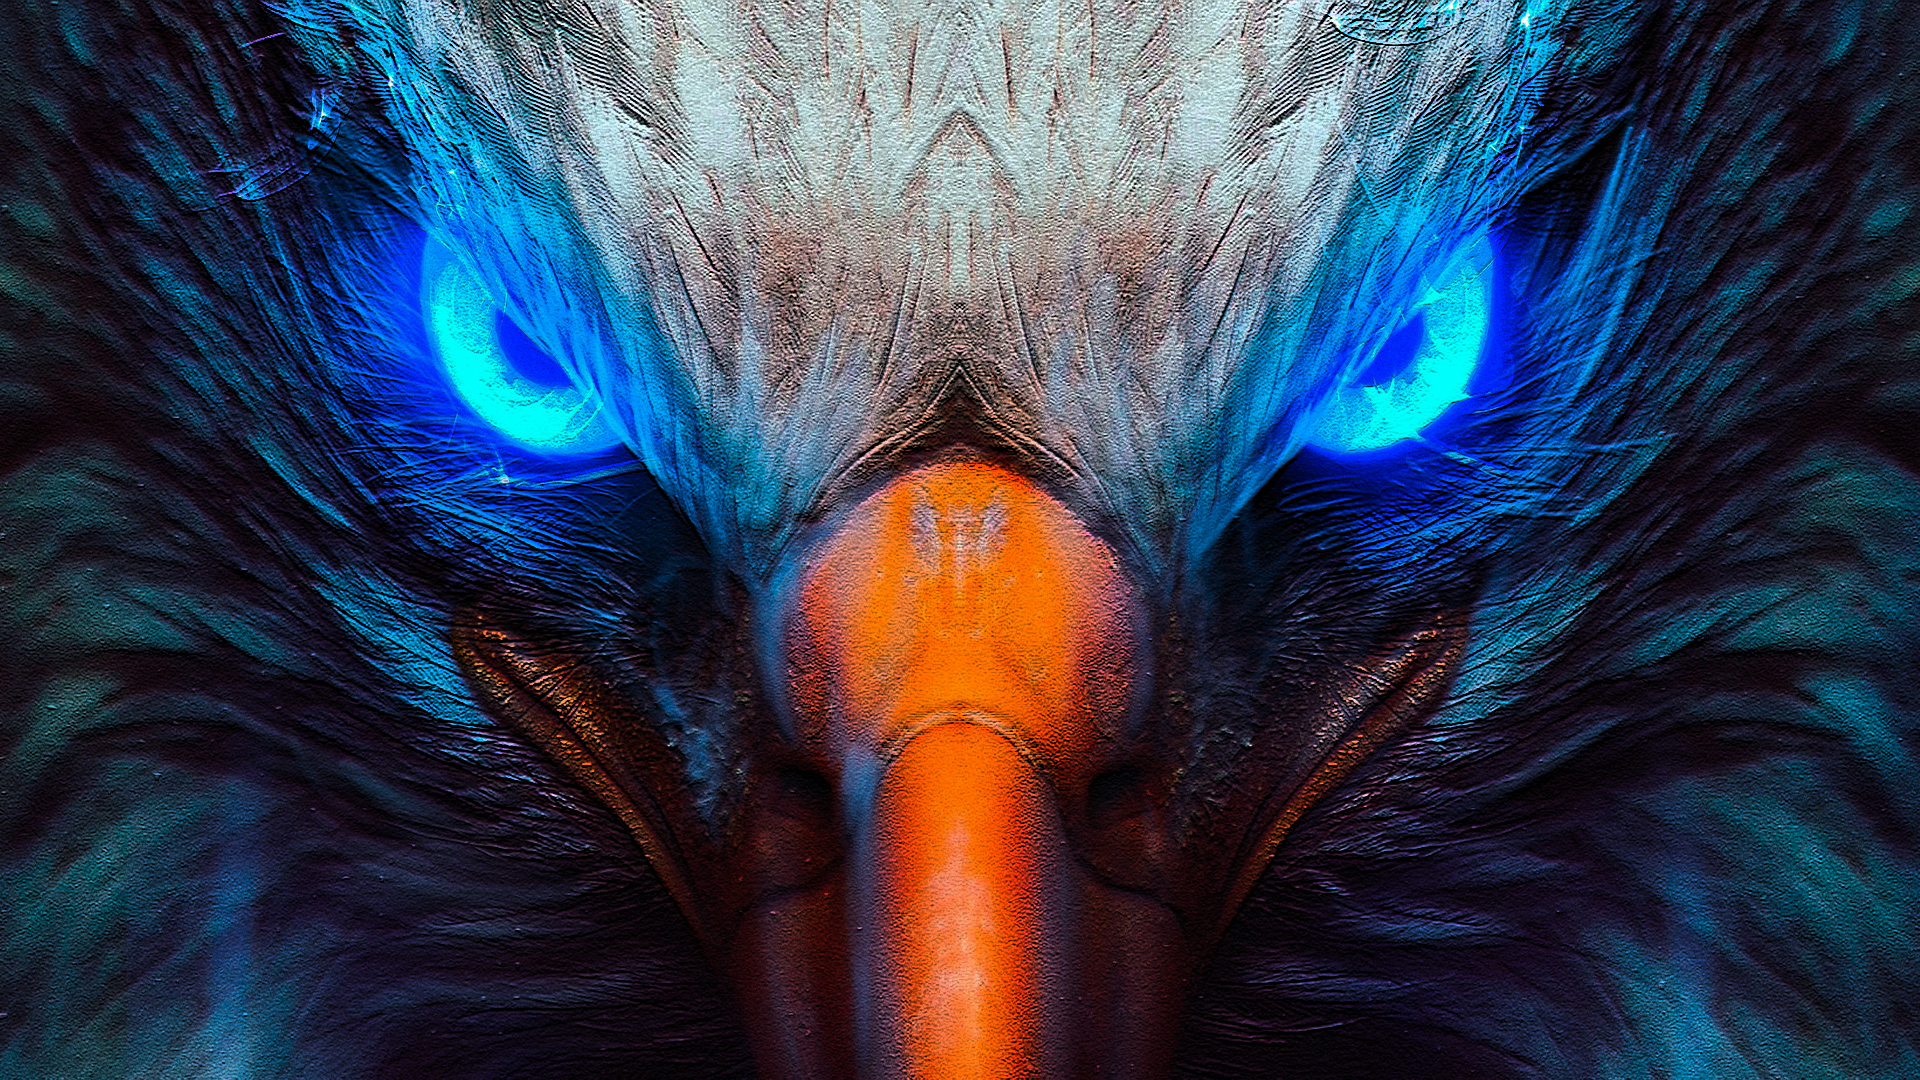 800 Best Eagle Images  100 Free Download  Pexels Stock Photos